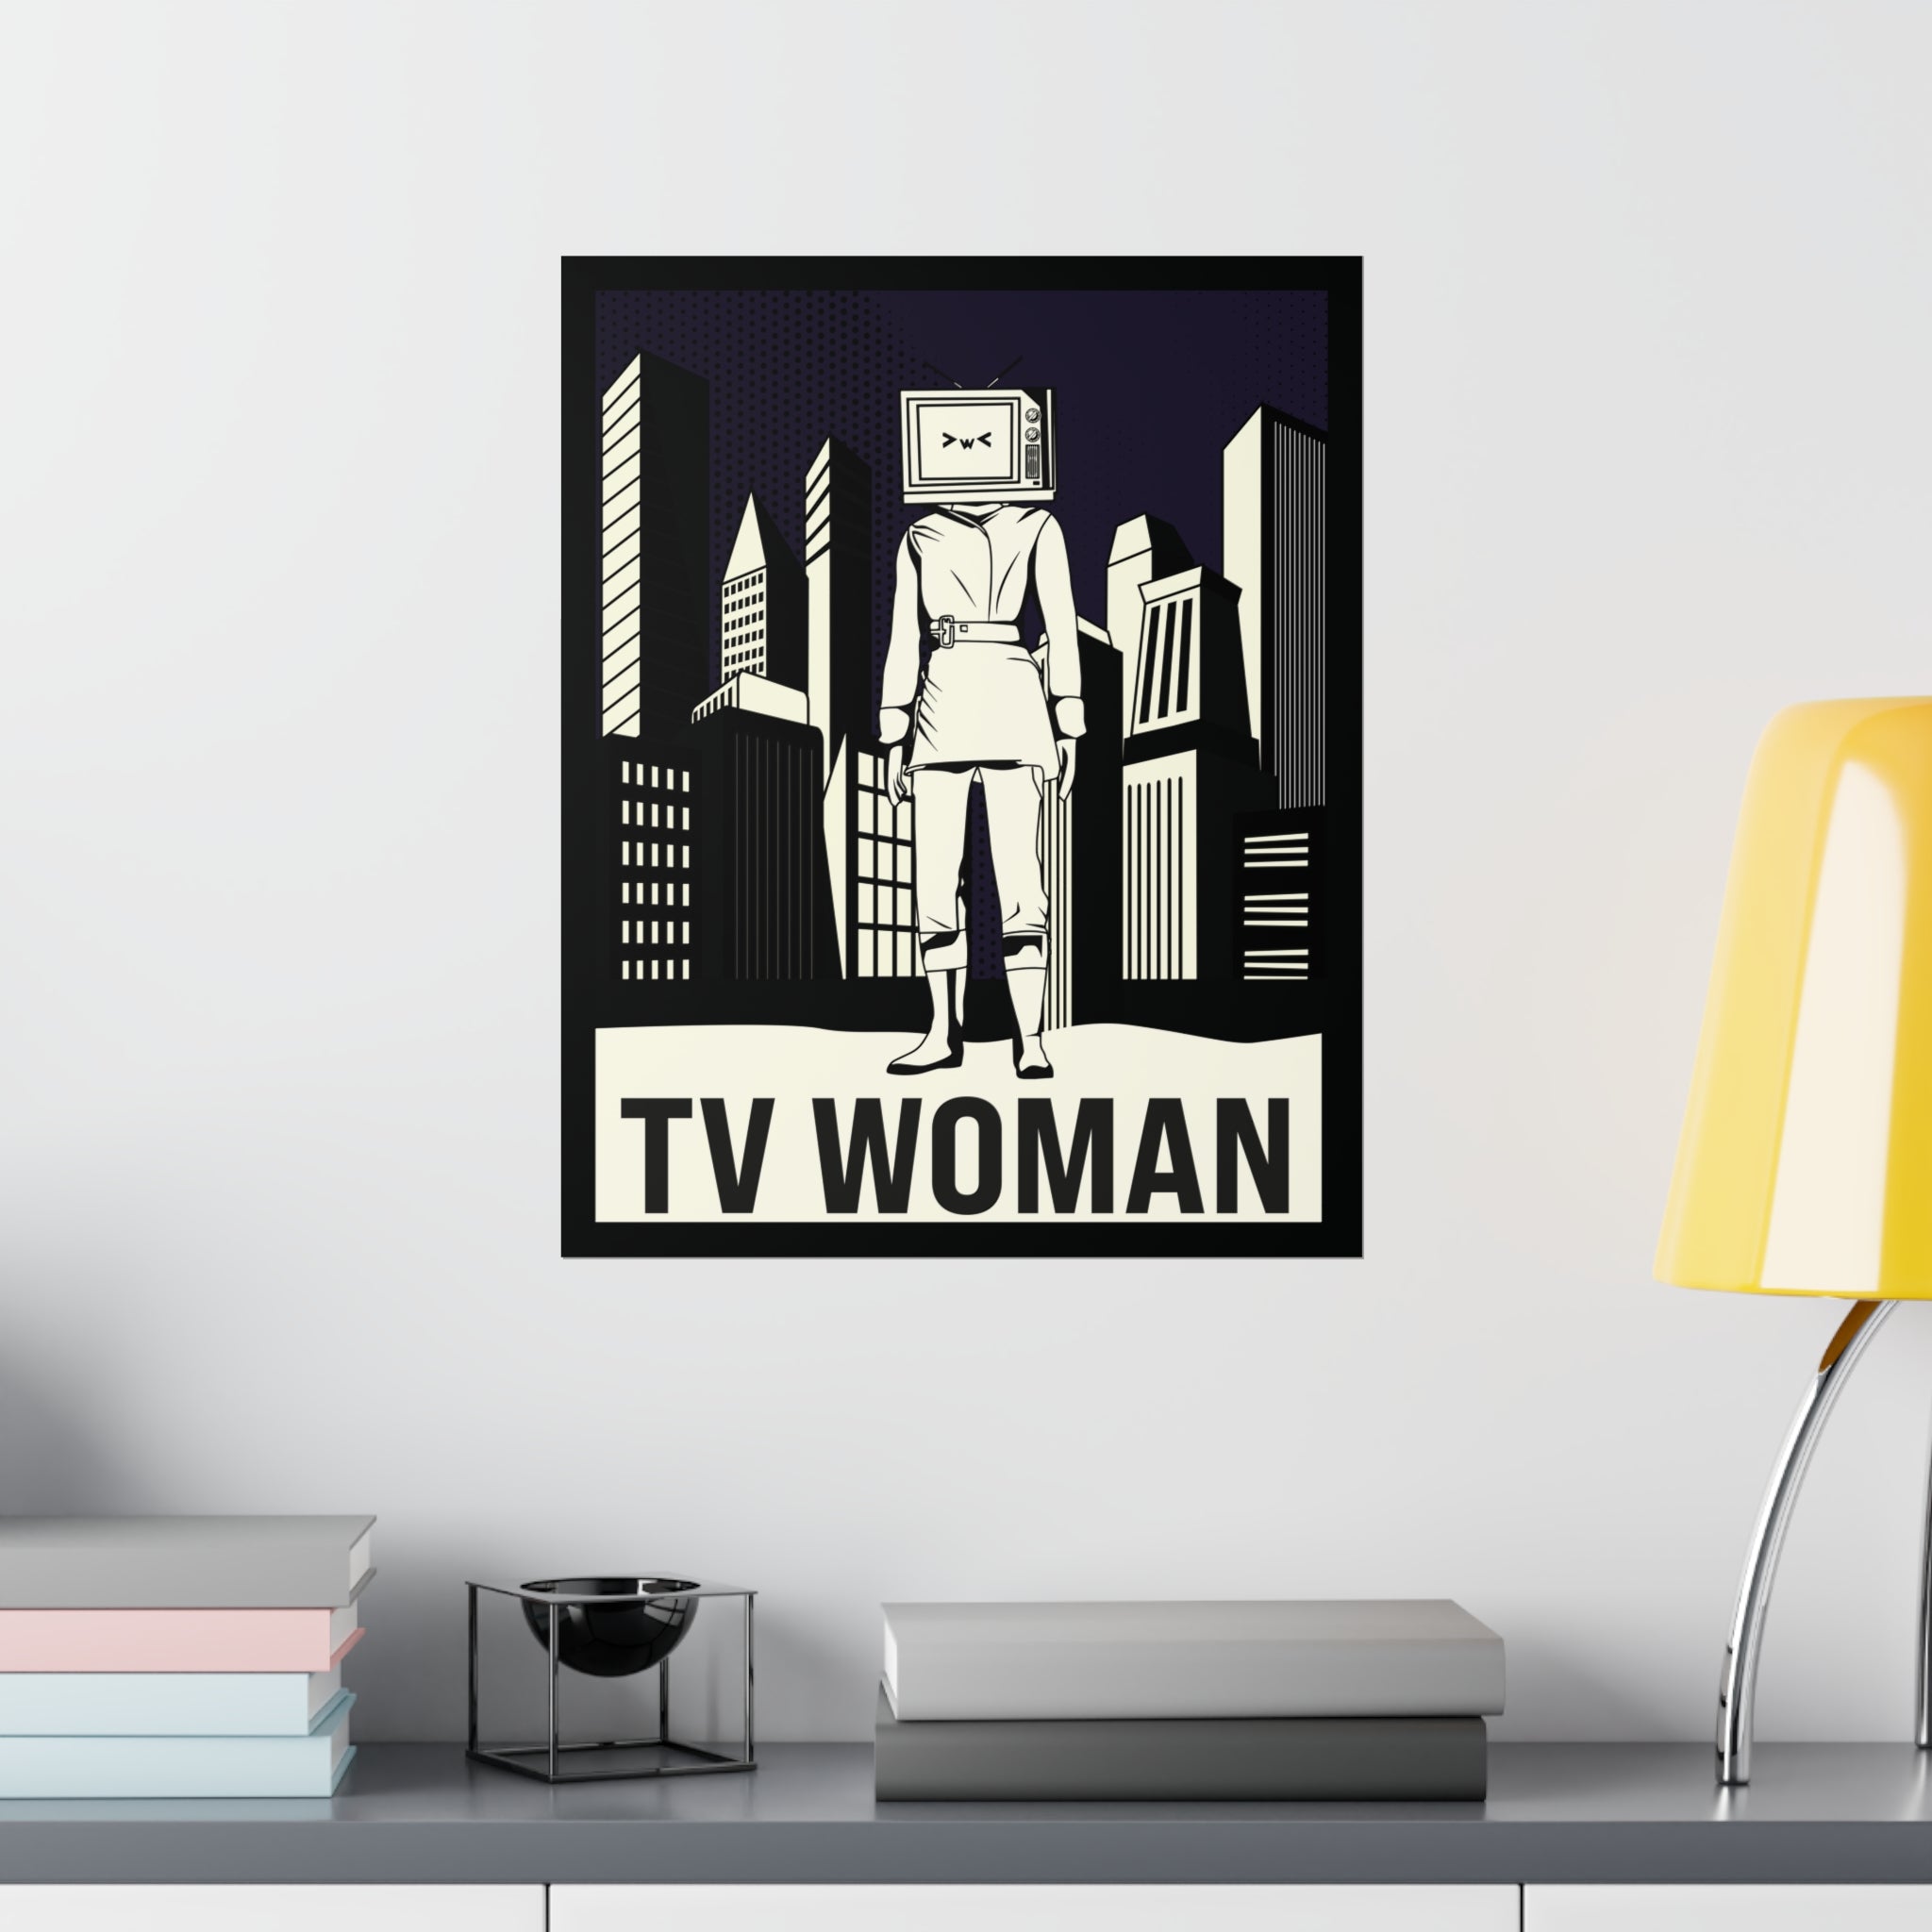 16x20 poster featuring a stylized TV Woman against a simple city backdrop in a room over a shelf